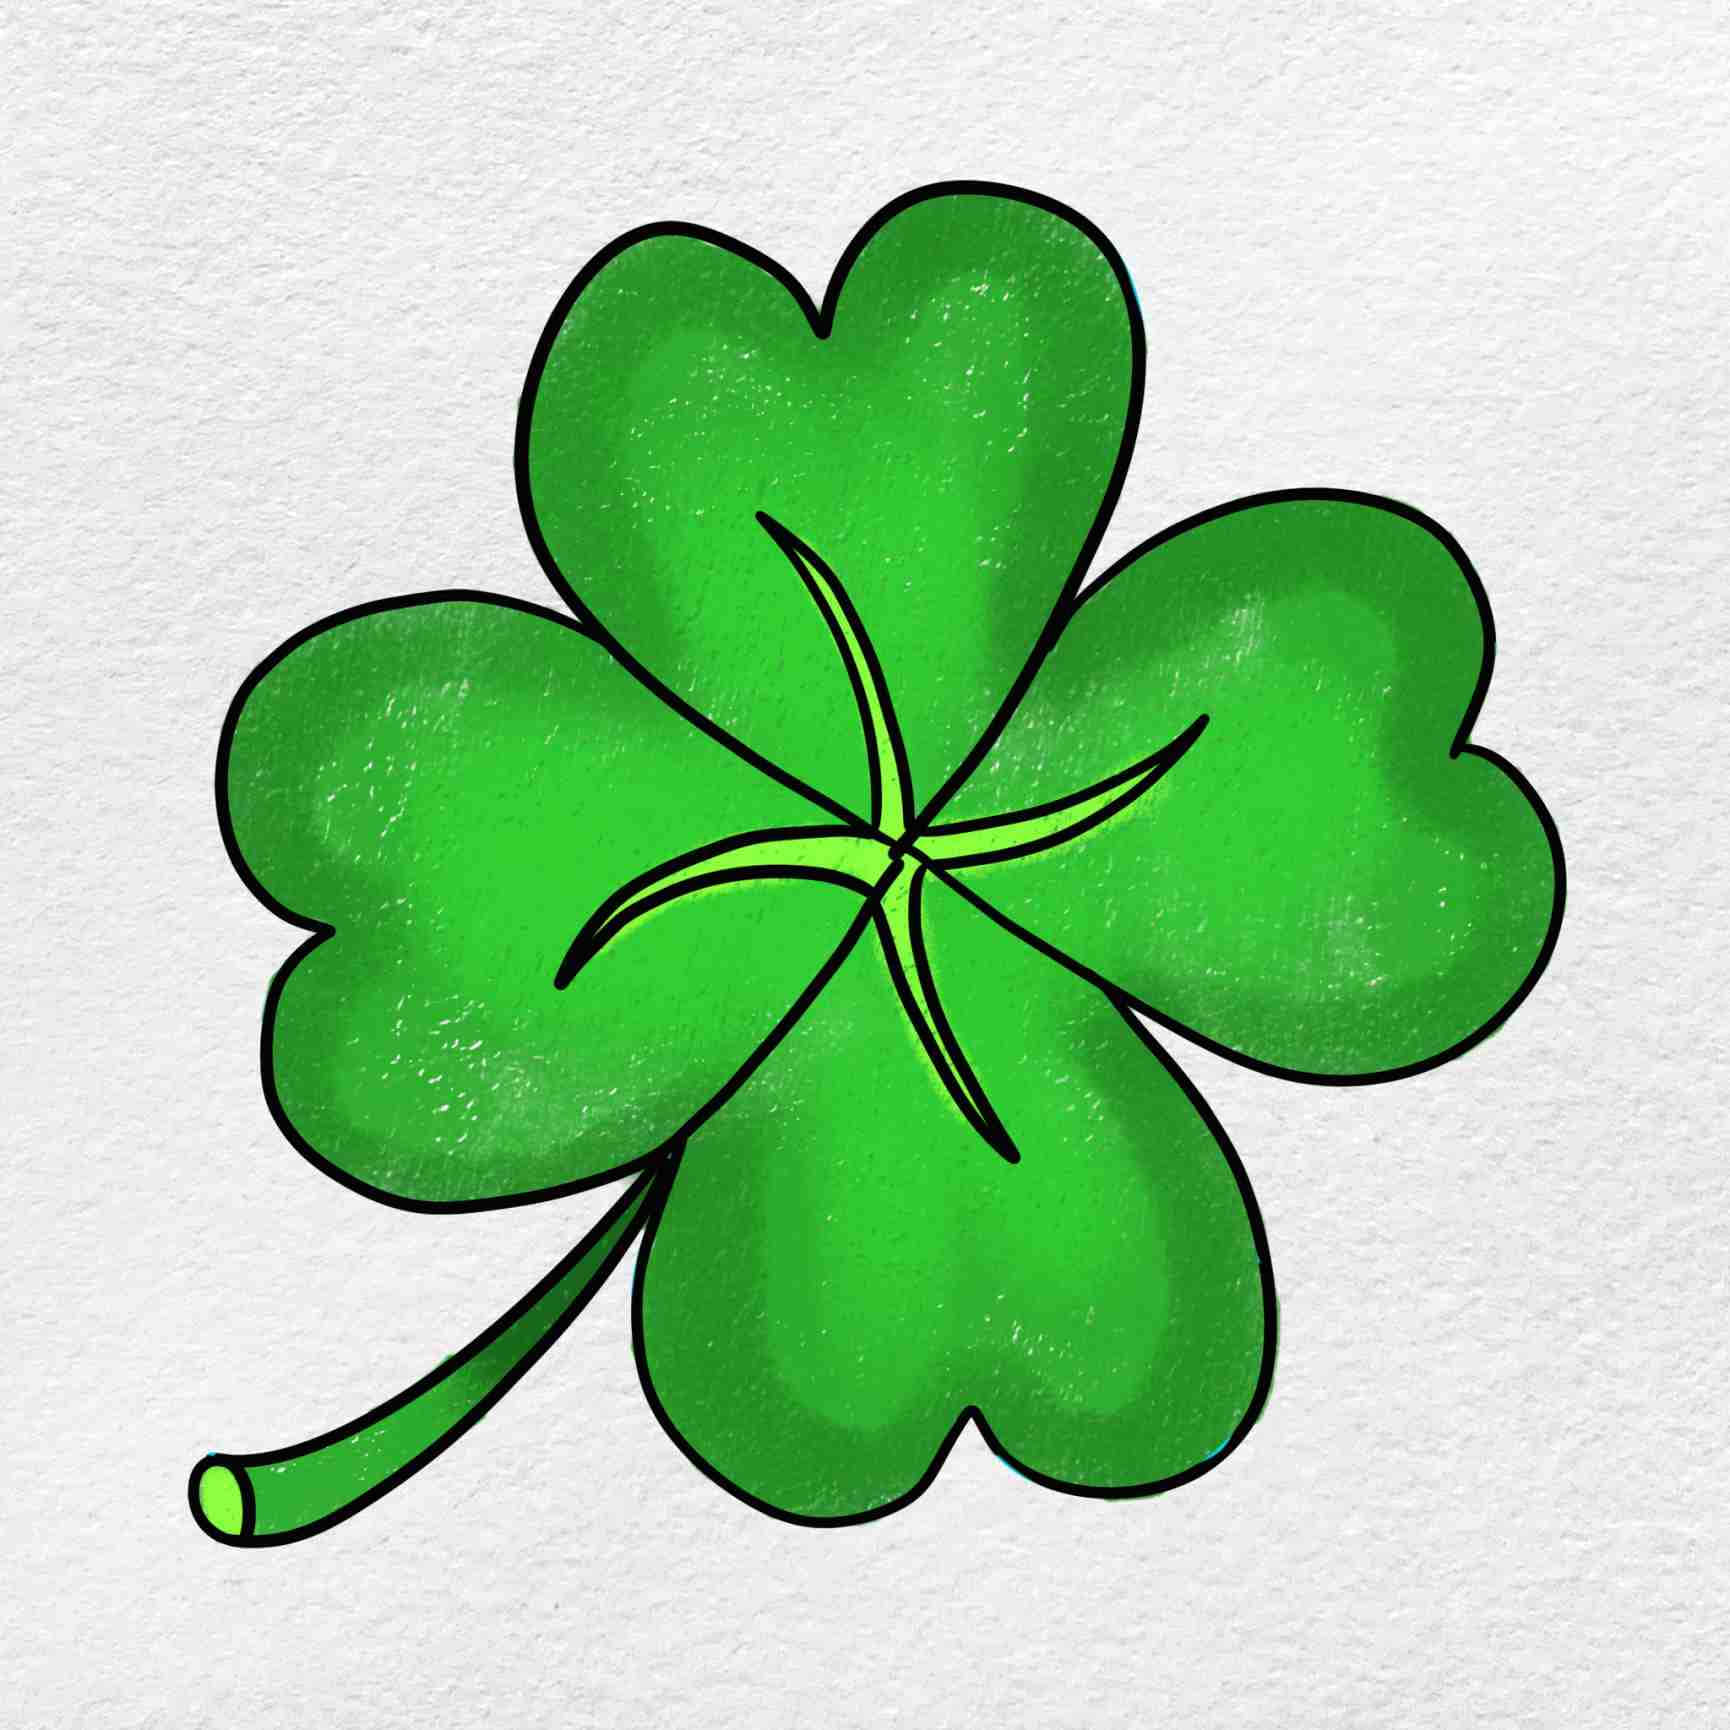 Download Four Leaf Clover Pictures 1730 X 1730 | Wallpapers.com